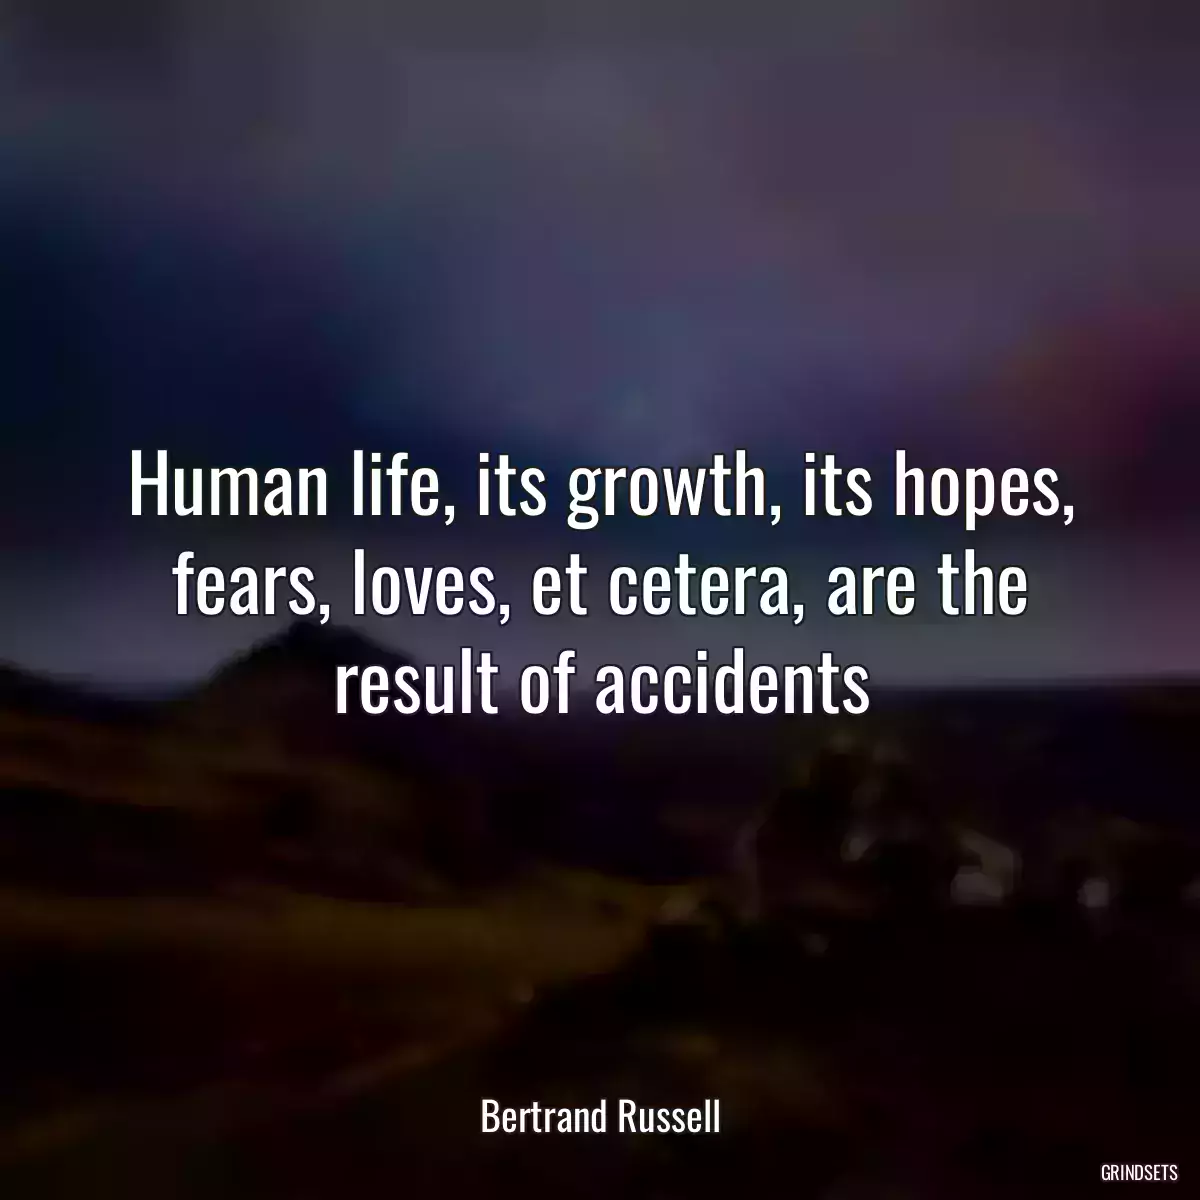 Human life, its growth, its hopes, fears, loves, et cetera, are the result of accidents